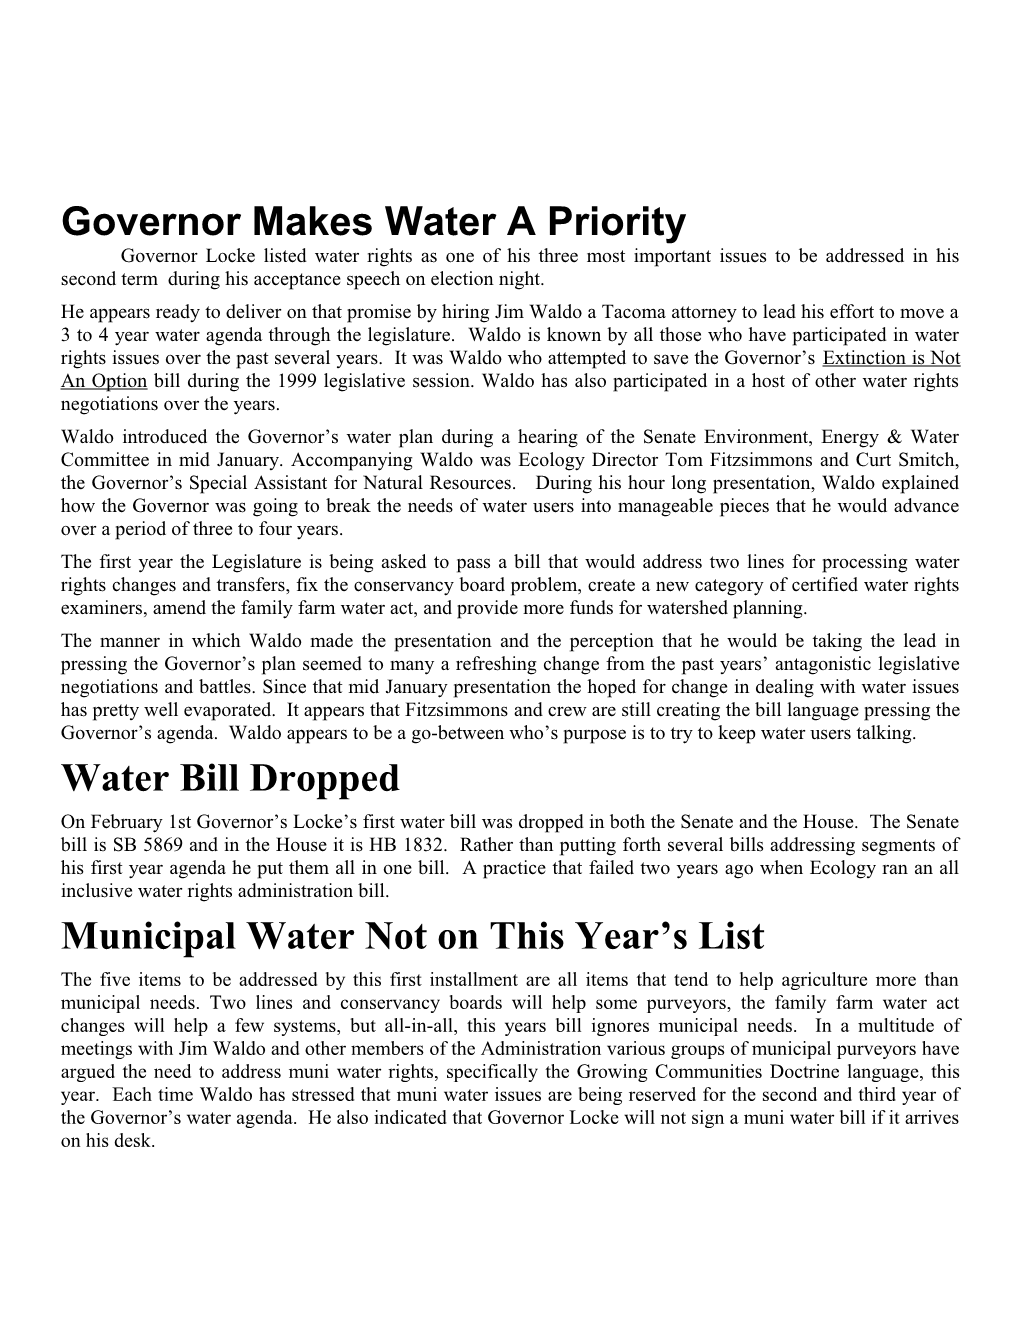 Governor Makes Water a Priority